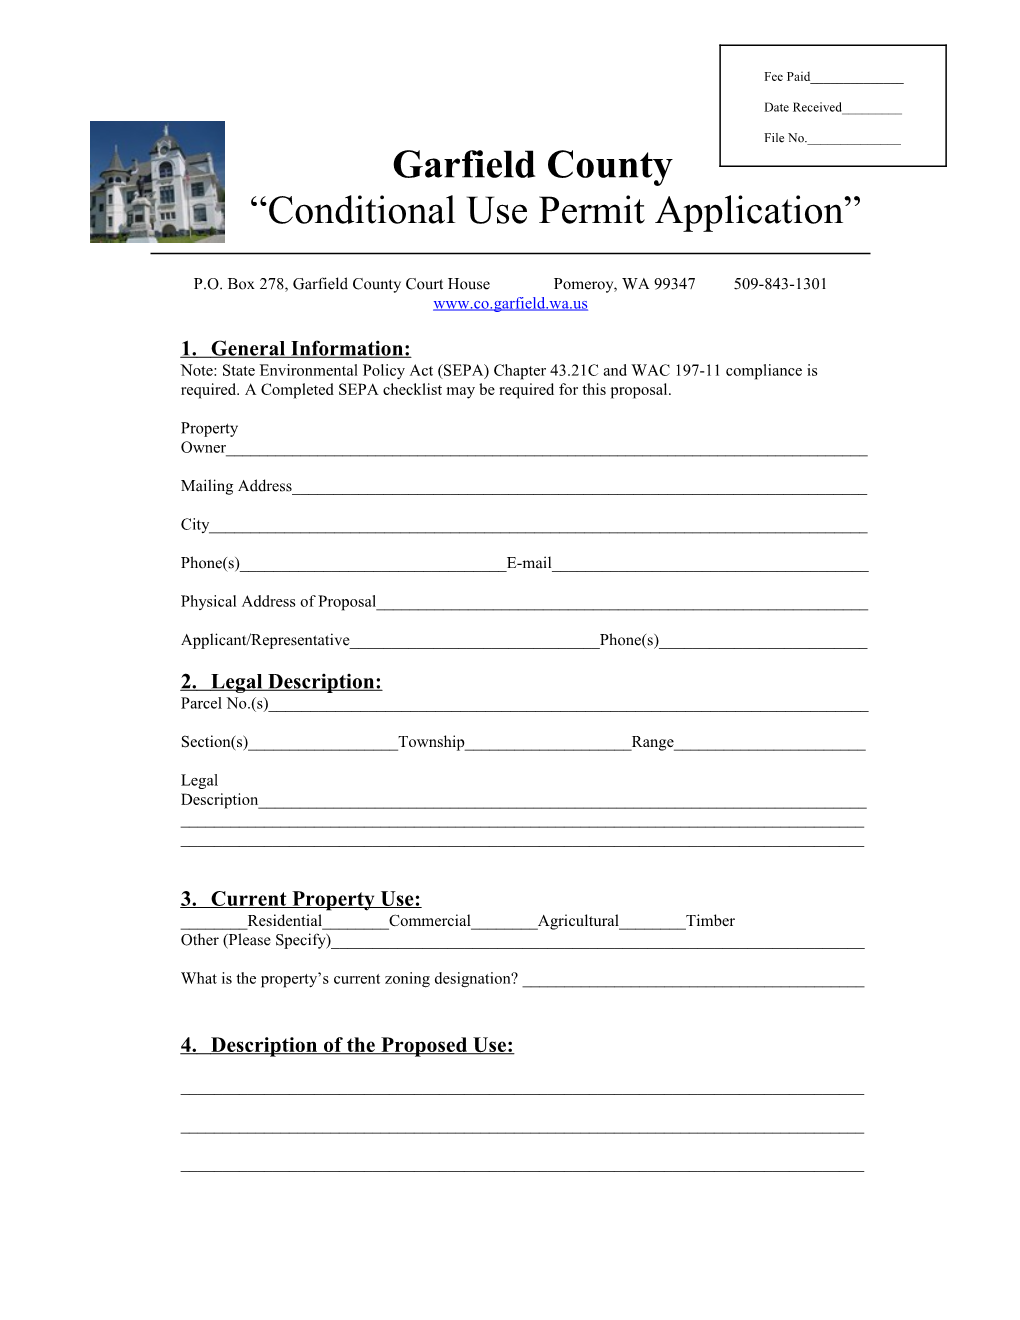 Conditional Use Permit Application s1